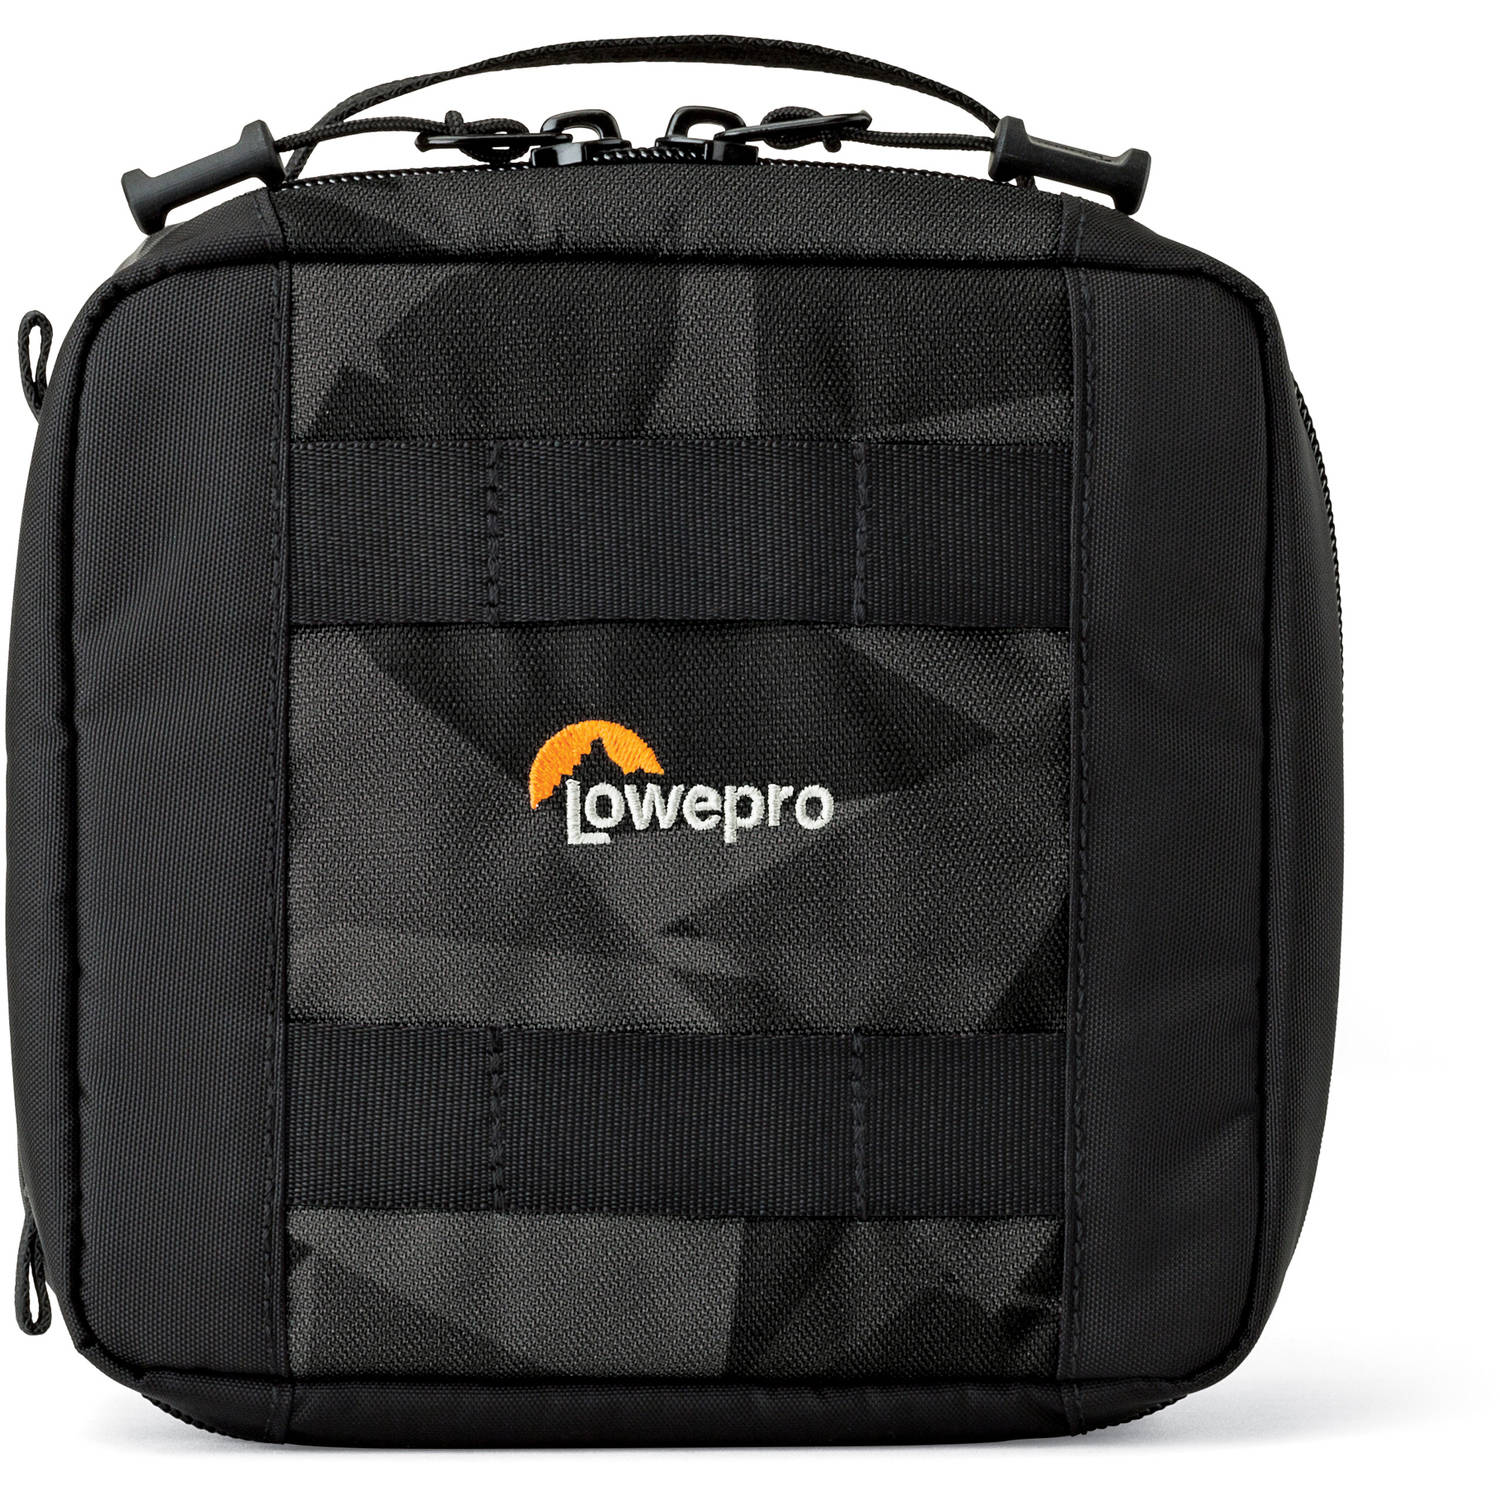 Lowepro ViewPoint CS 60 Sided Case For 2 Action Cameras #LP36914 - image 1 of 5